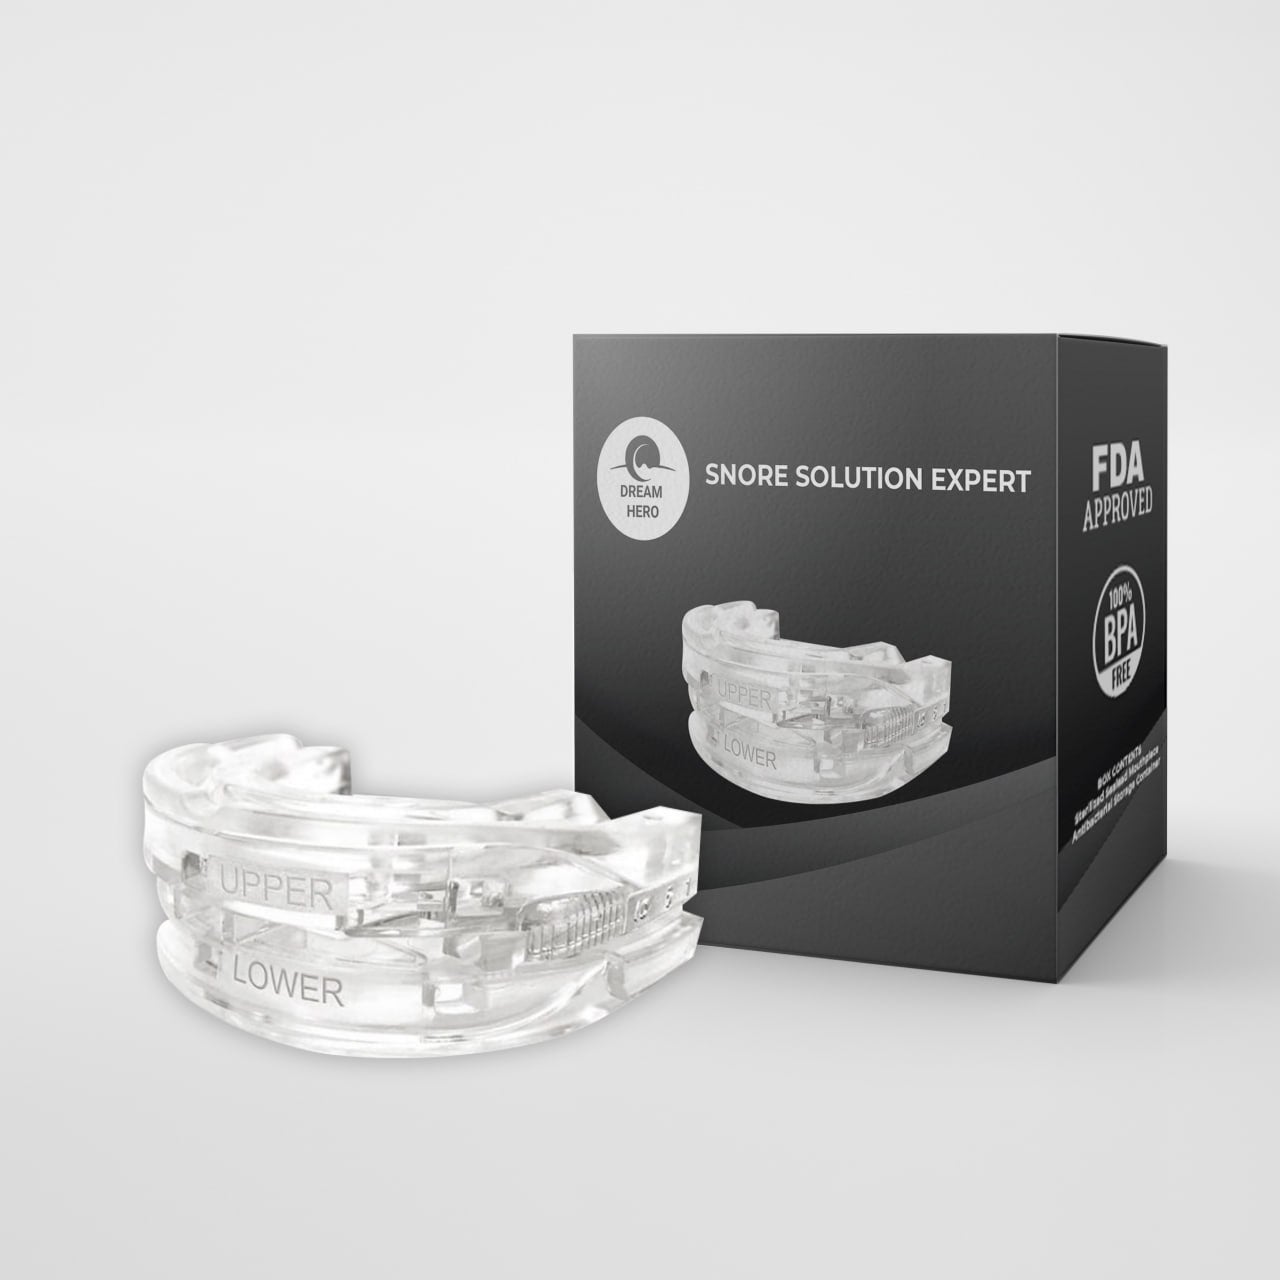 DREAM HERO MOUTH GUARD Reviews REVEALED You Need To Know – DREAMHERO  MOUTHGUARD - READ BEFORE BUYING 